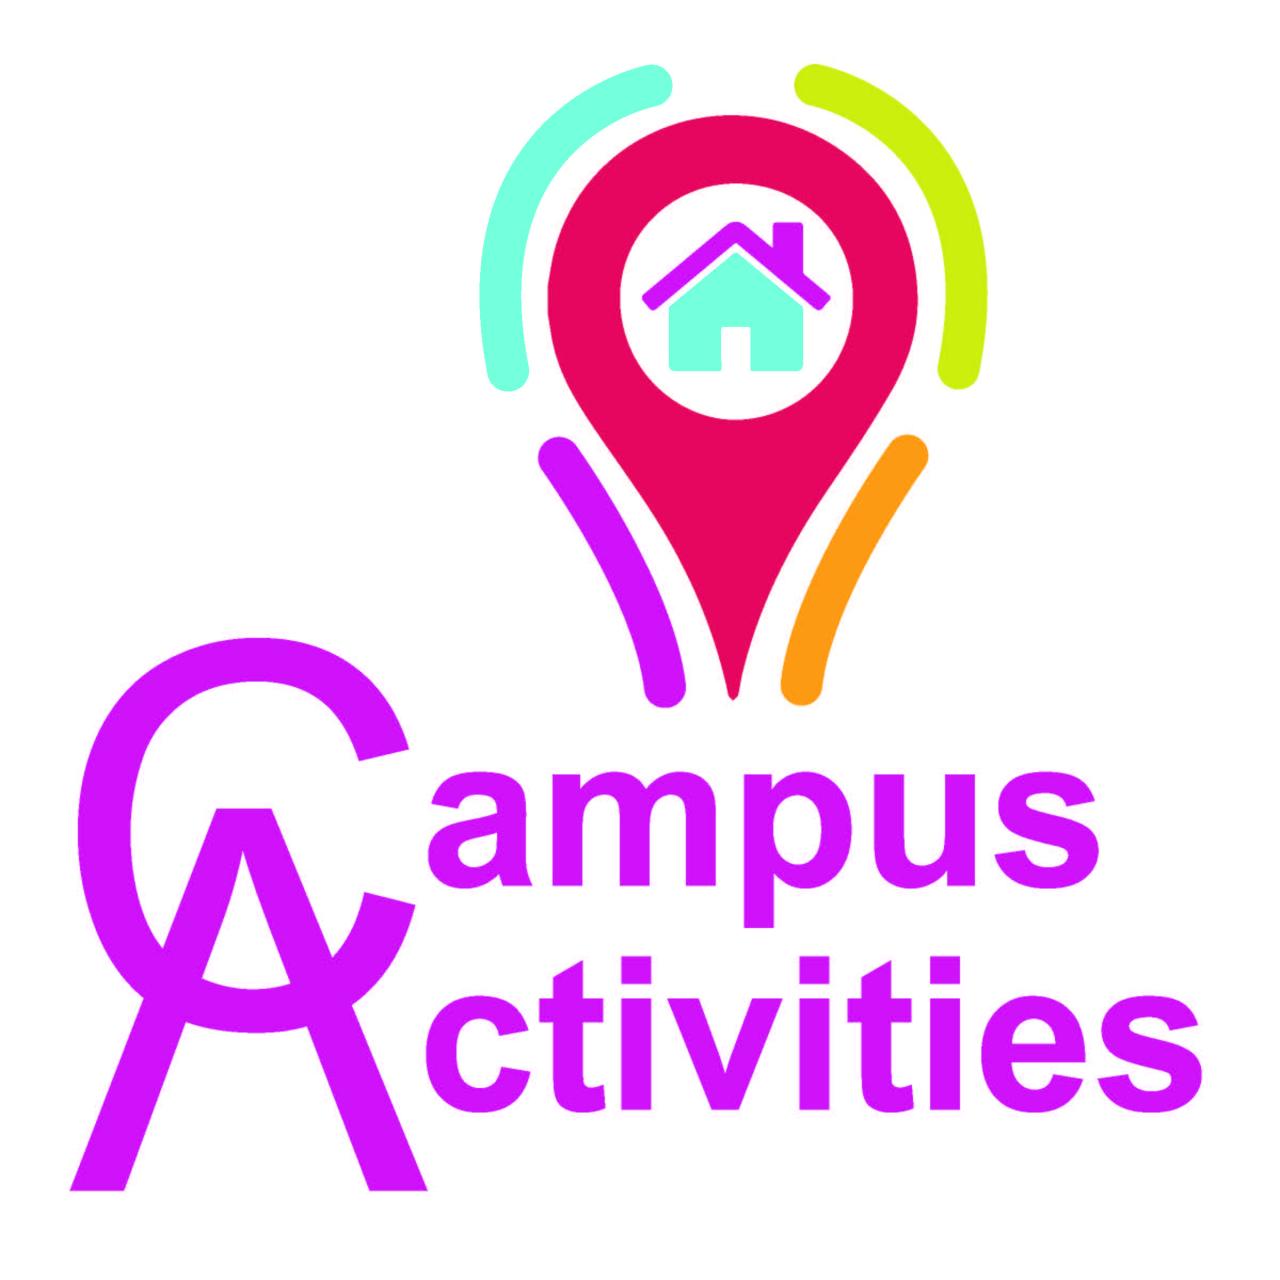 Campus Activities logo (stacked)